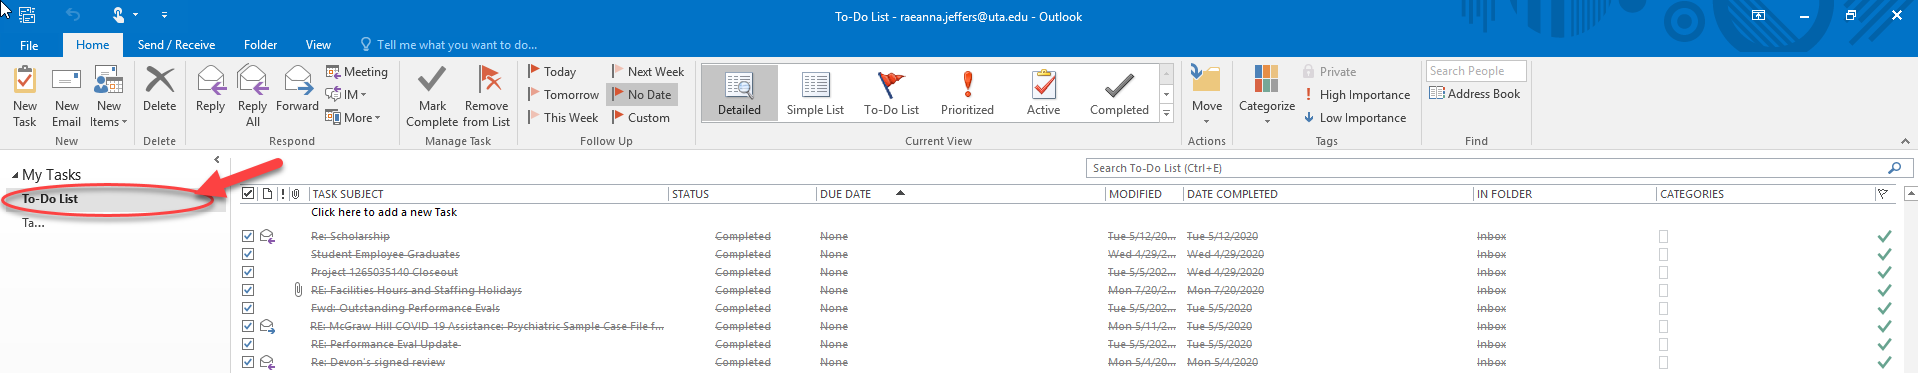 Screenshot showing how to view your to-do list in a full pane